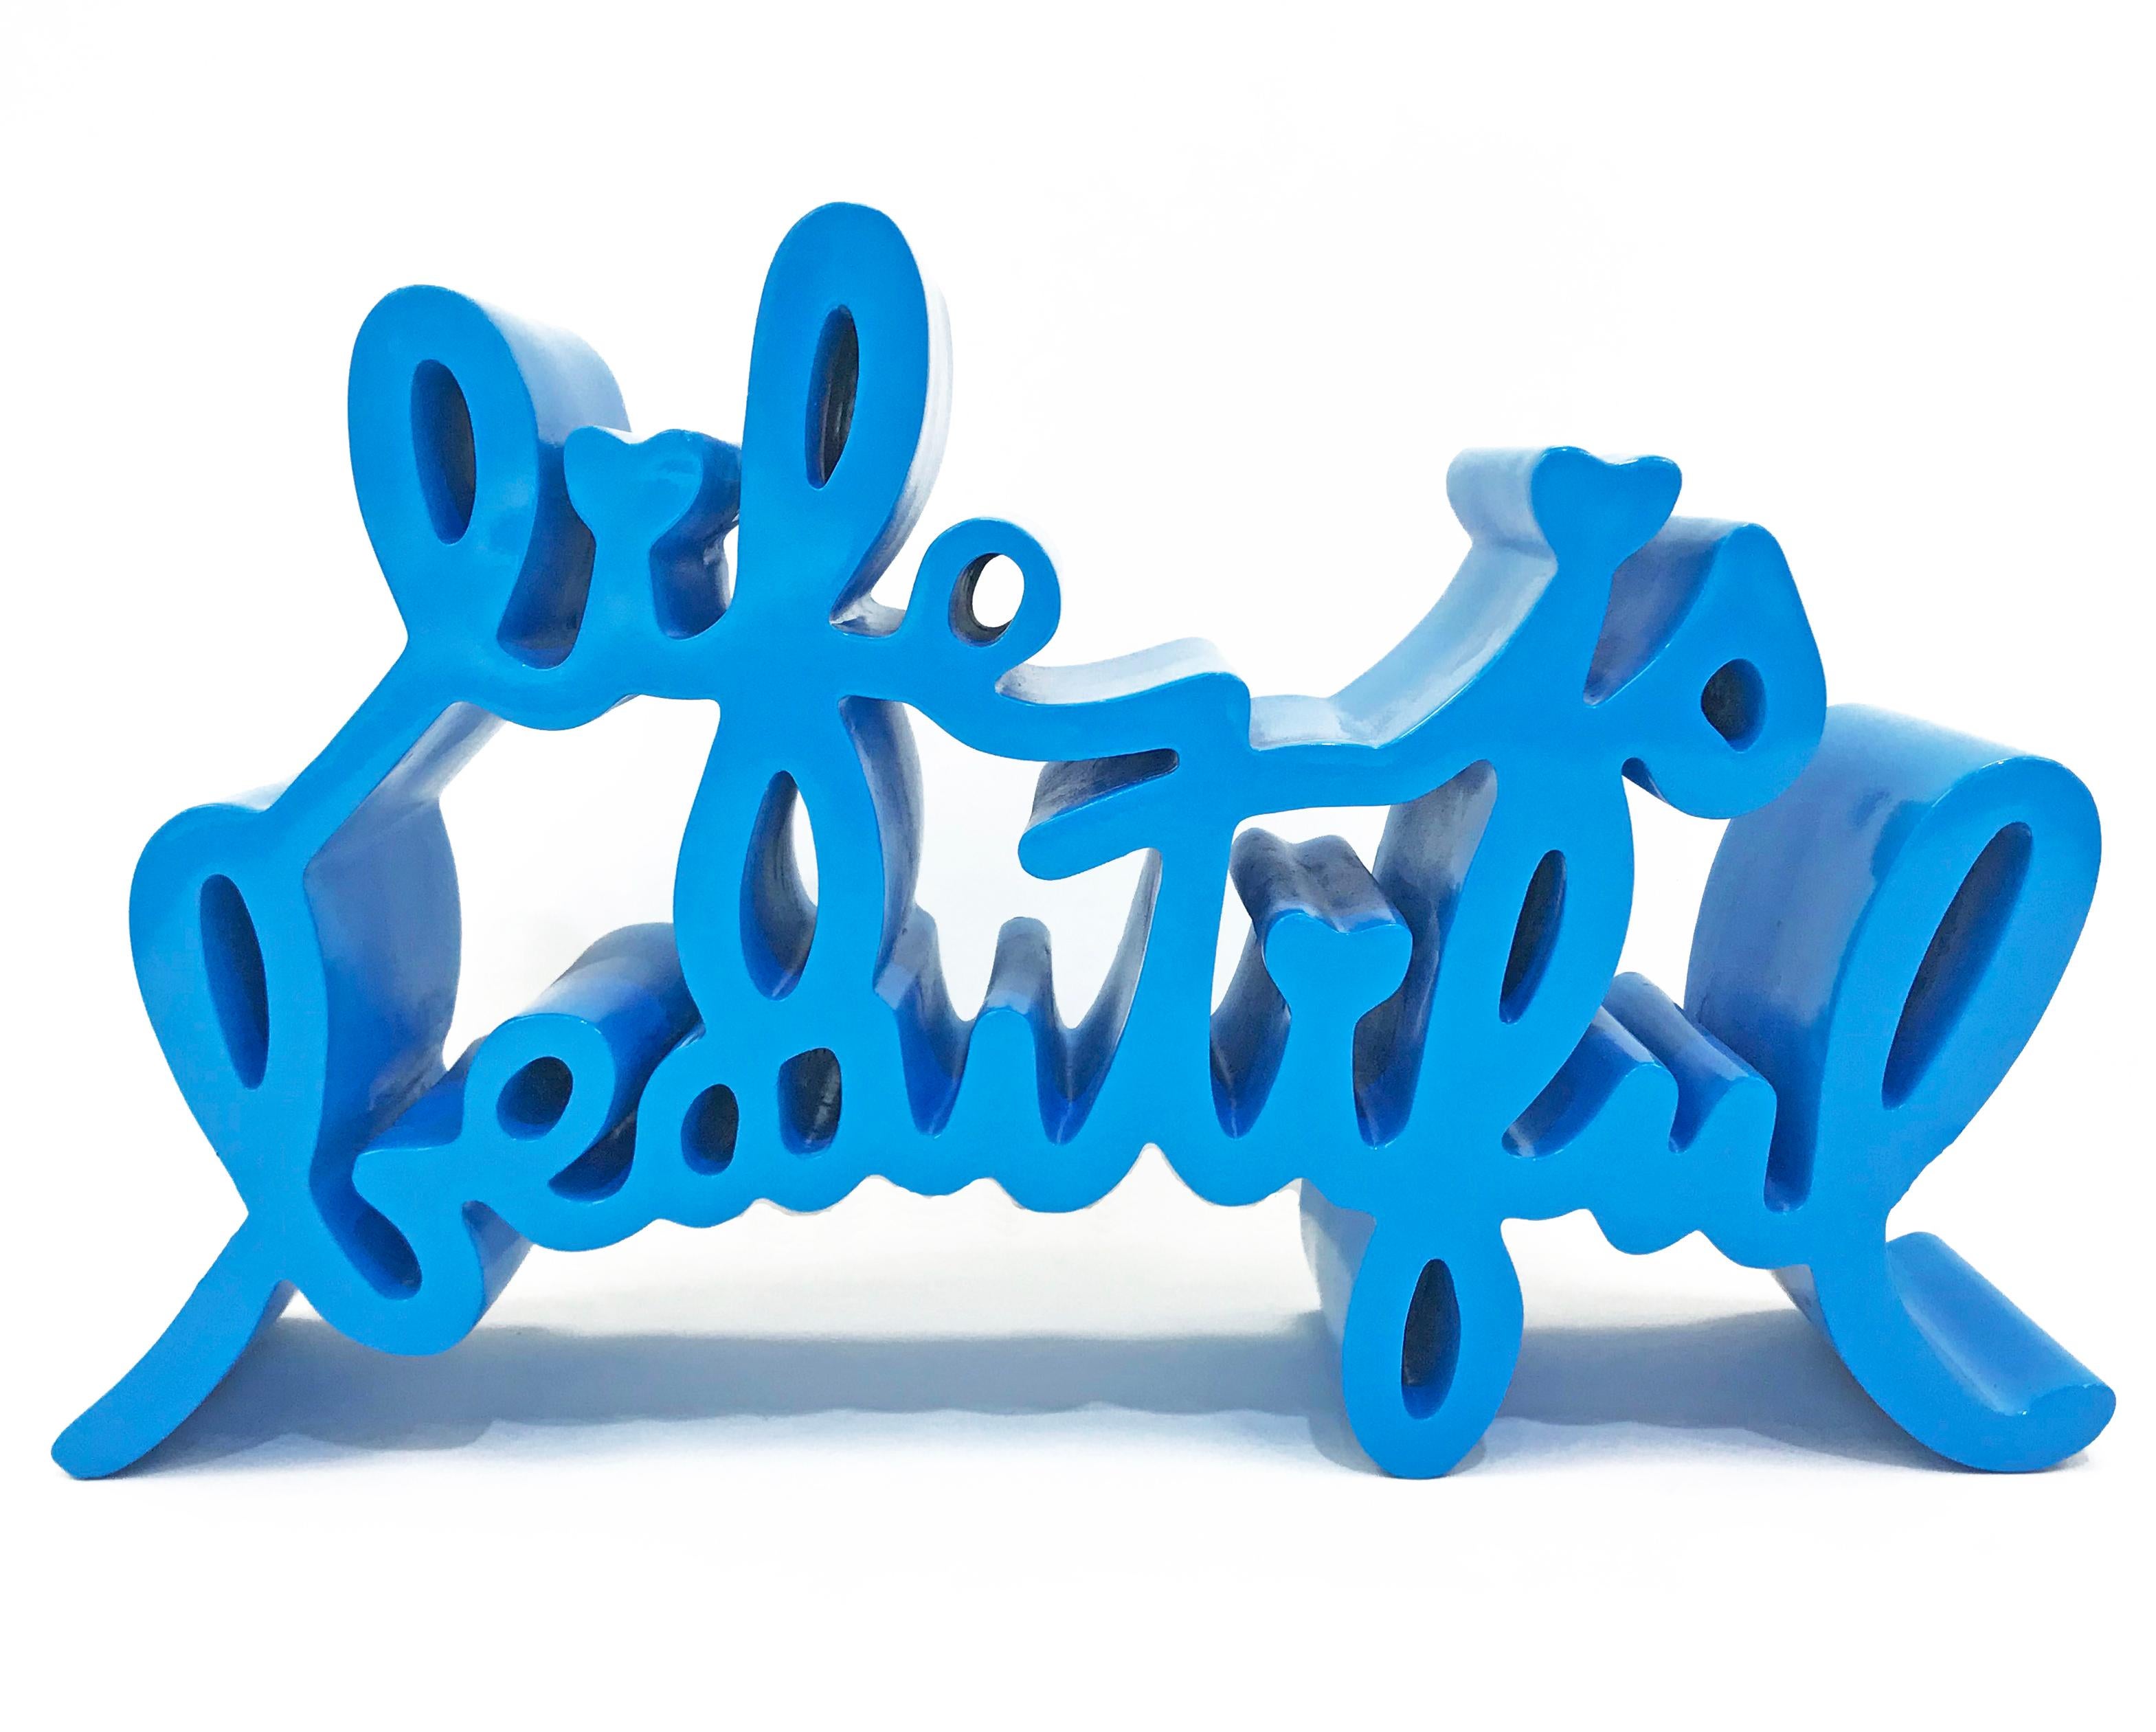 LIFE IS BEAUTIFUL (LARGE BLUE SCULPTURE)